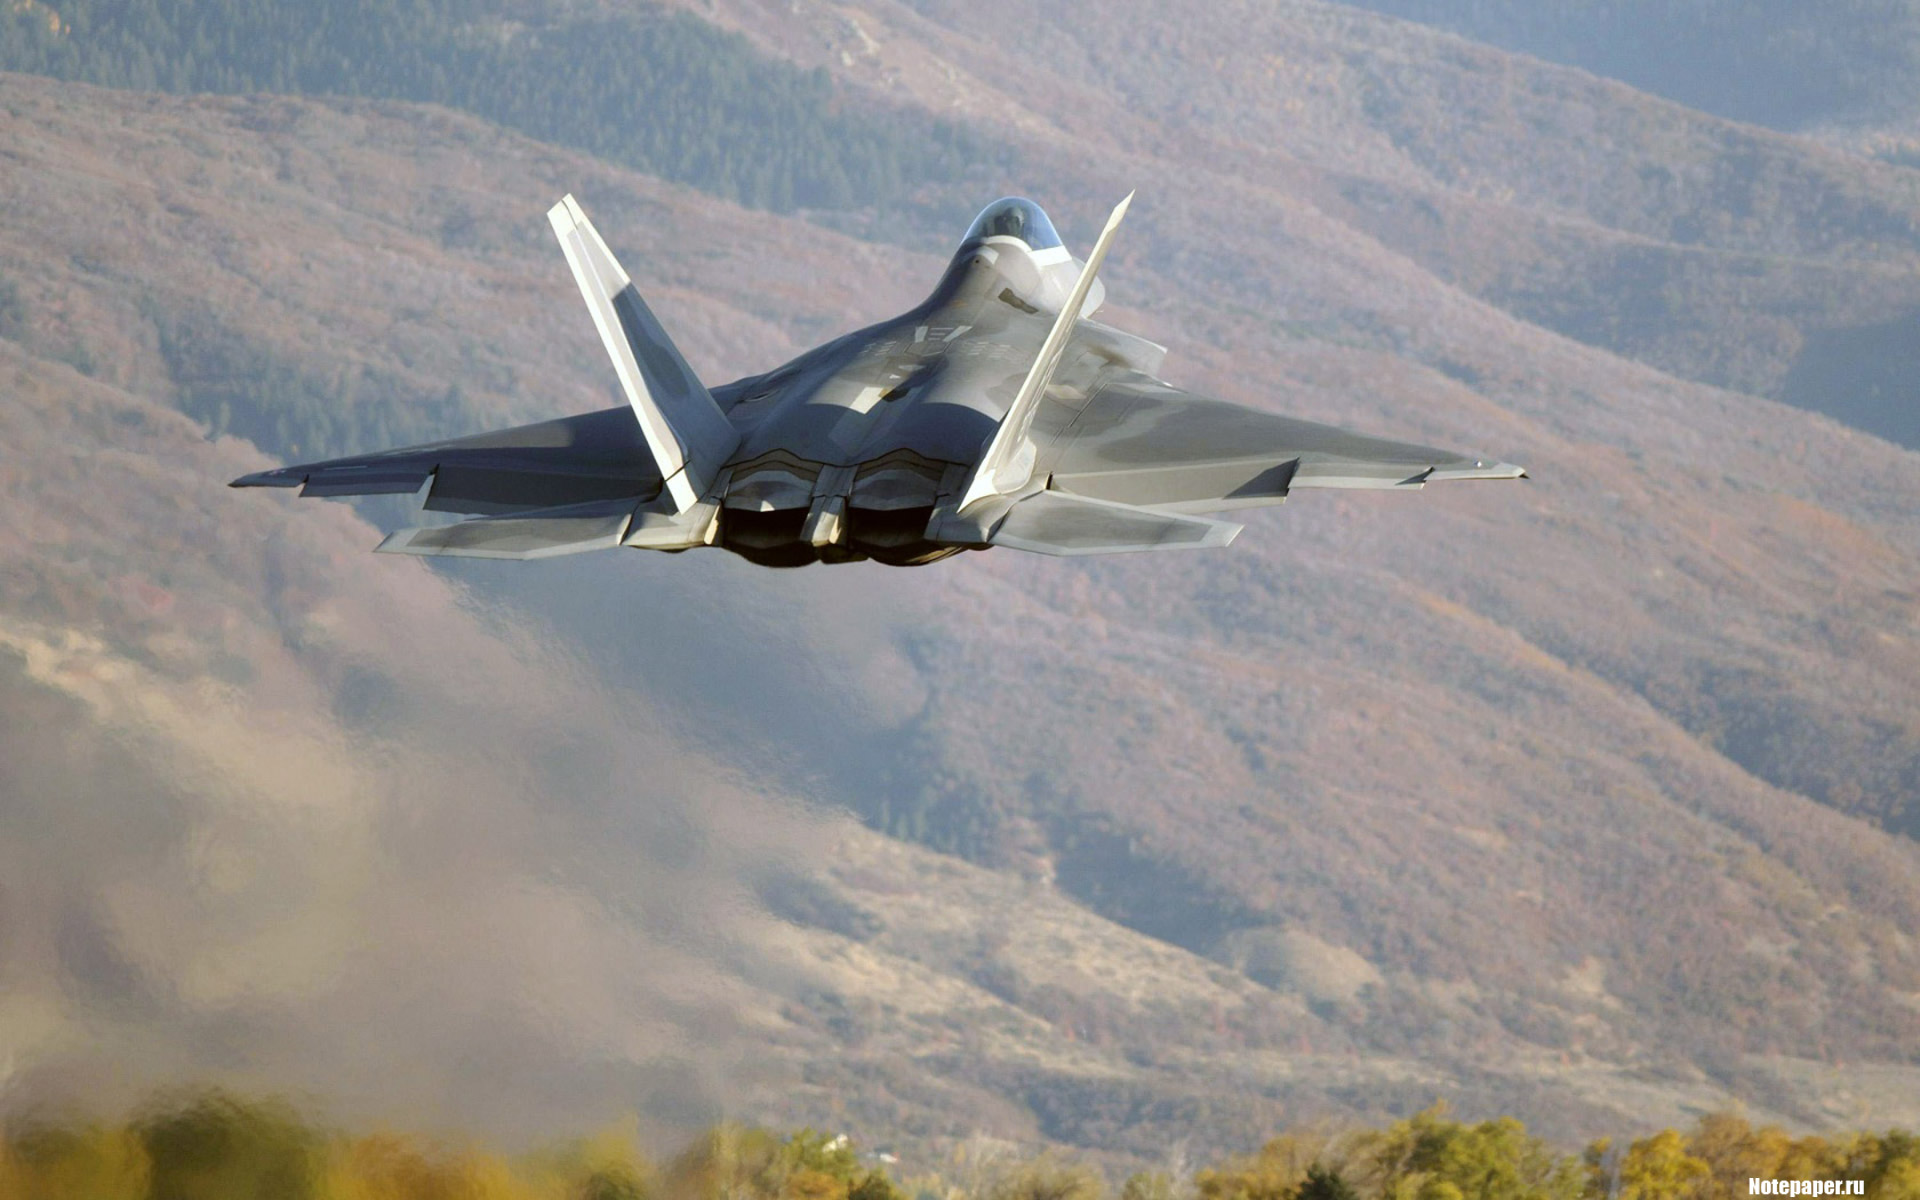 General 1920x1200 F-22 Raptor US Air Force aircraft military aircraft vehicle military military vehicle take-off American aircraft jets jet fighter Lockheed Martin